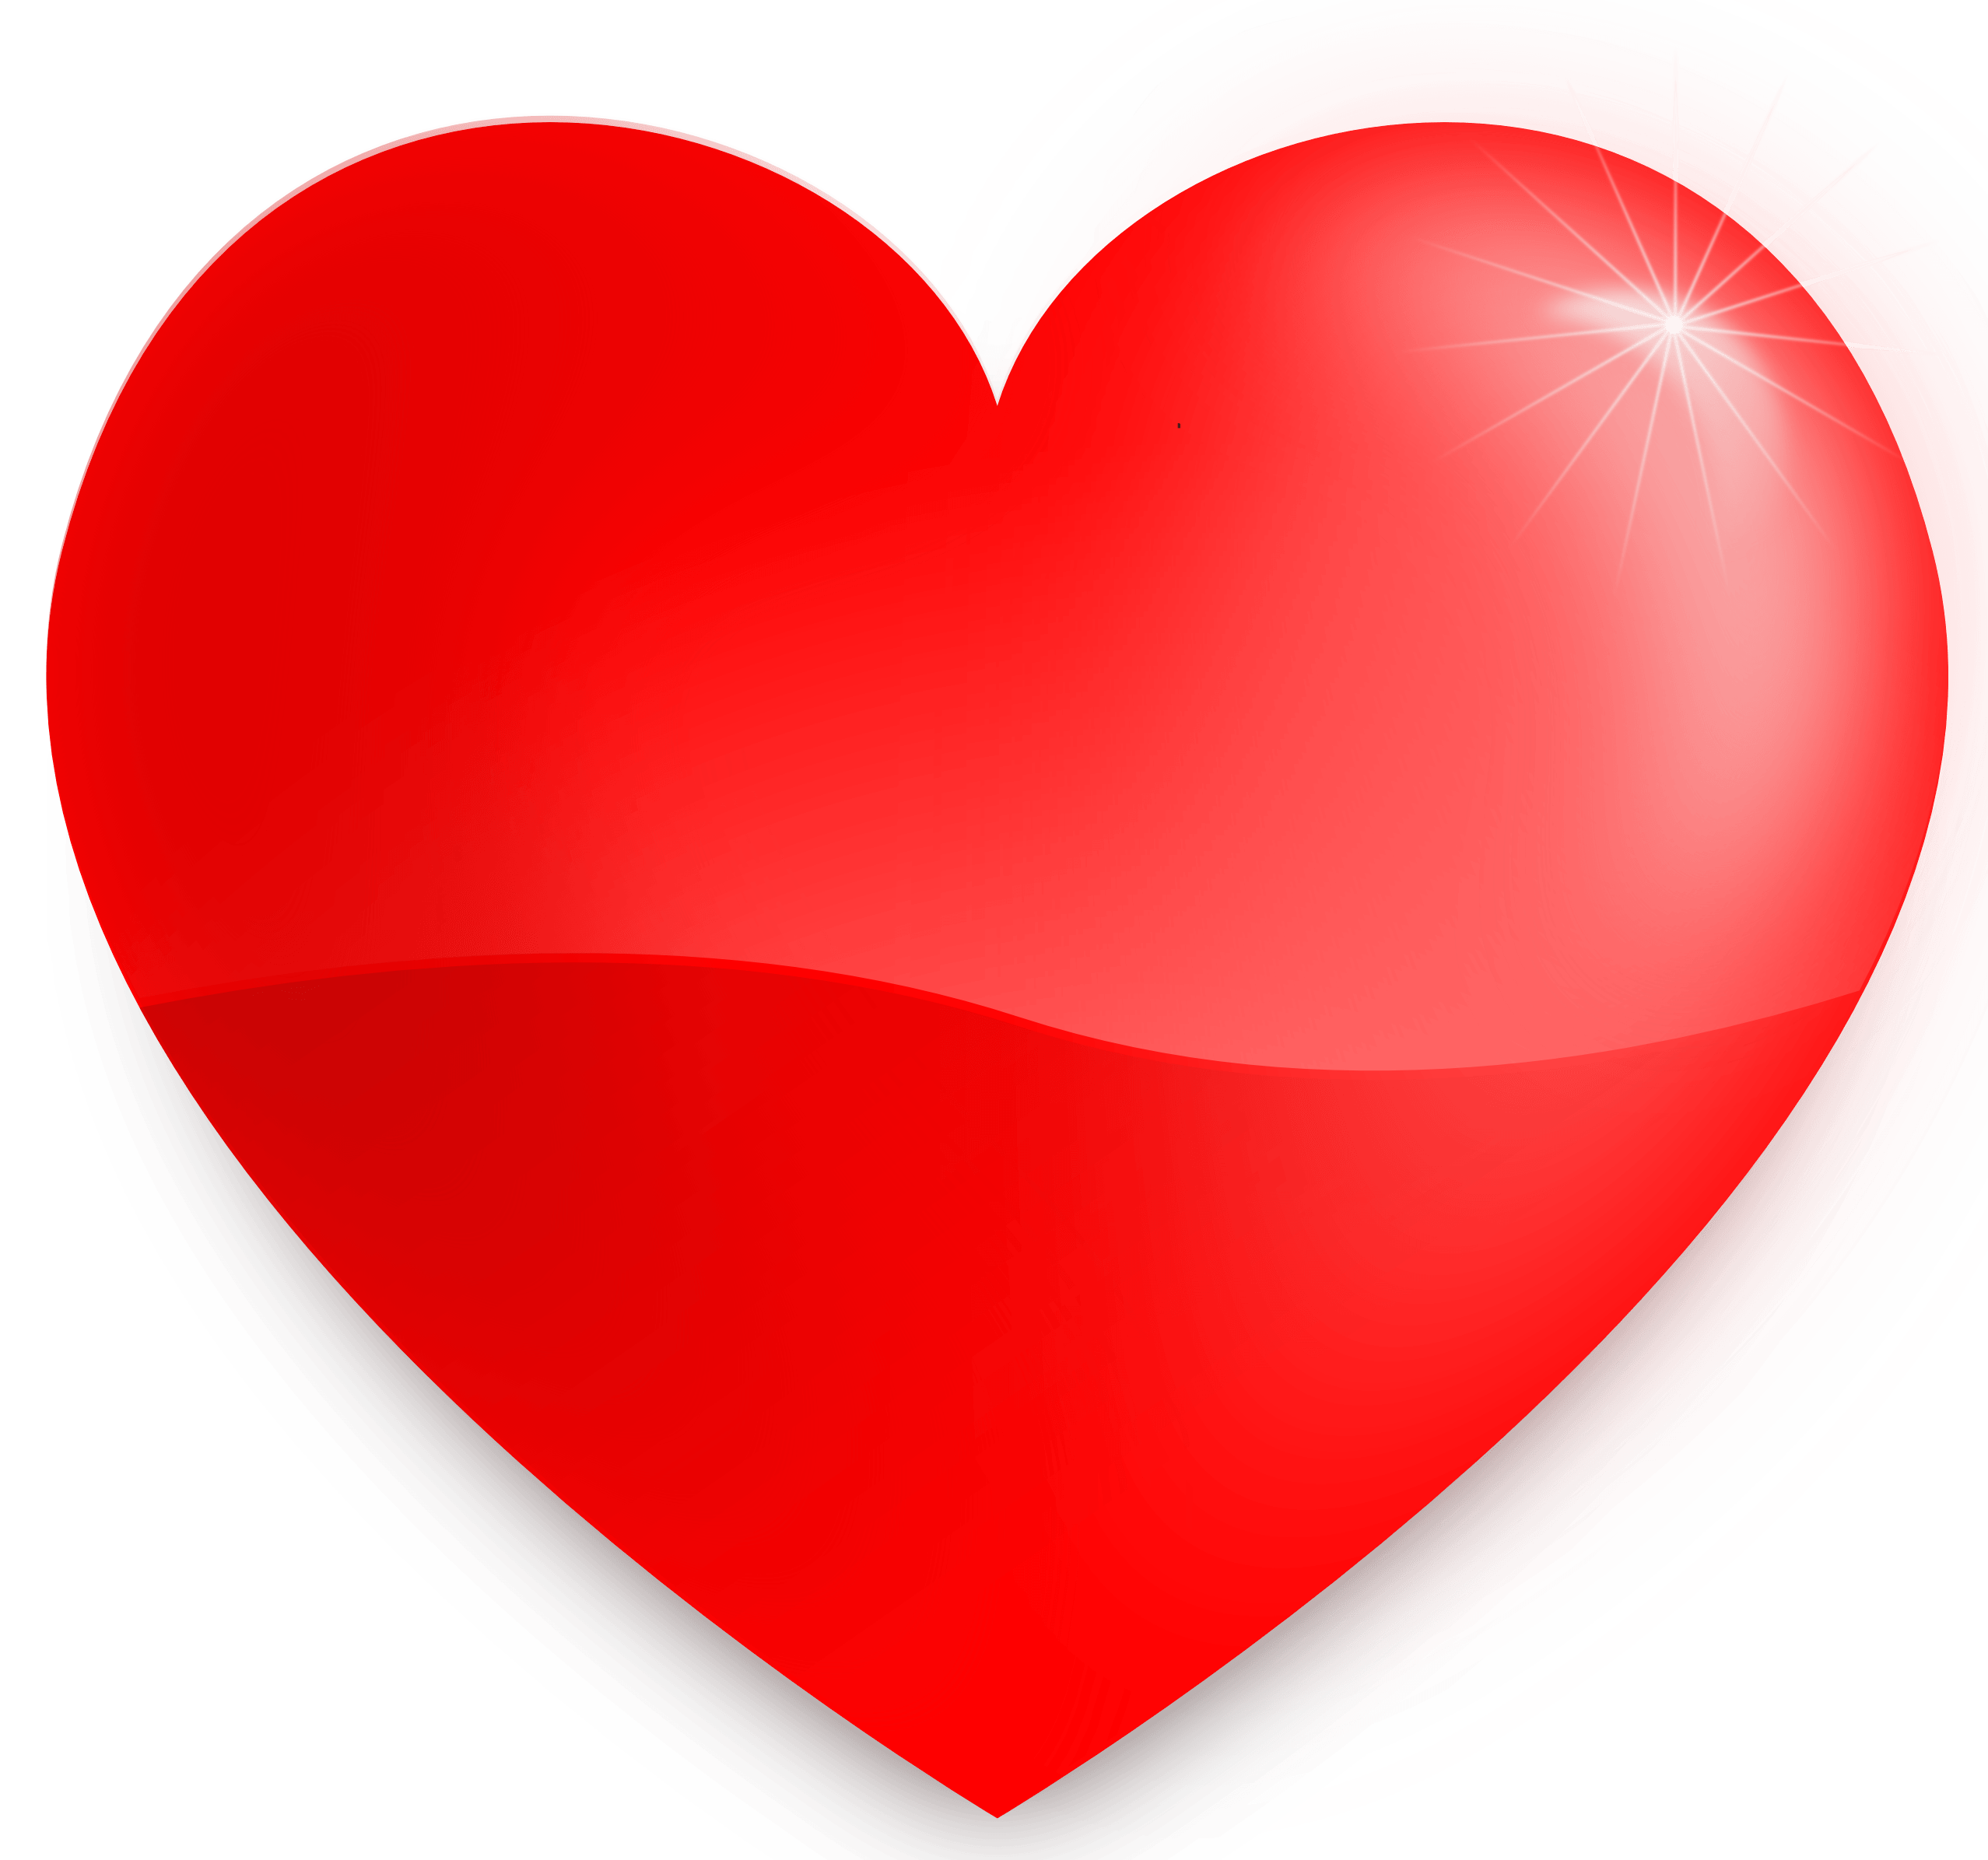 Download Png Image   Heart Png Image Download - Herz, Transparent background PNG HD thumbnail